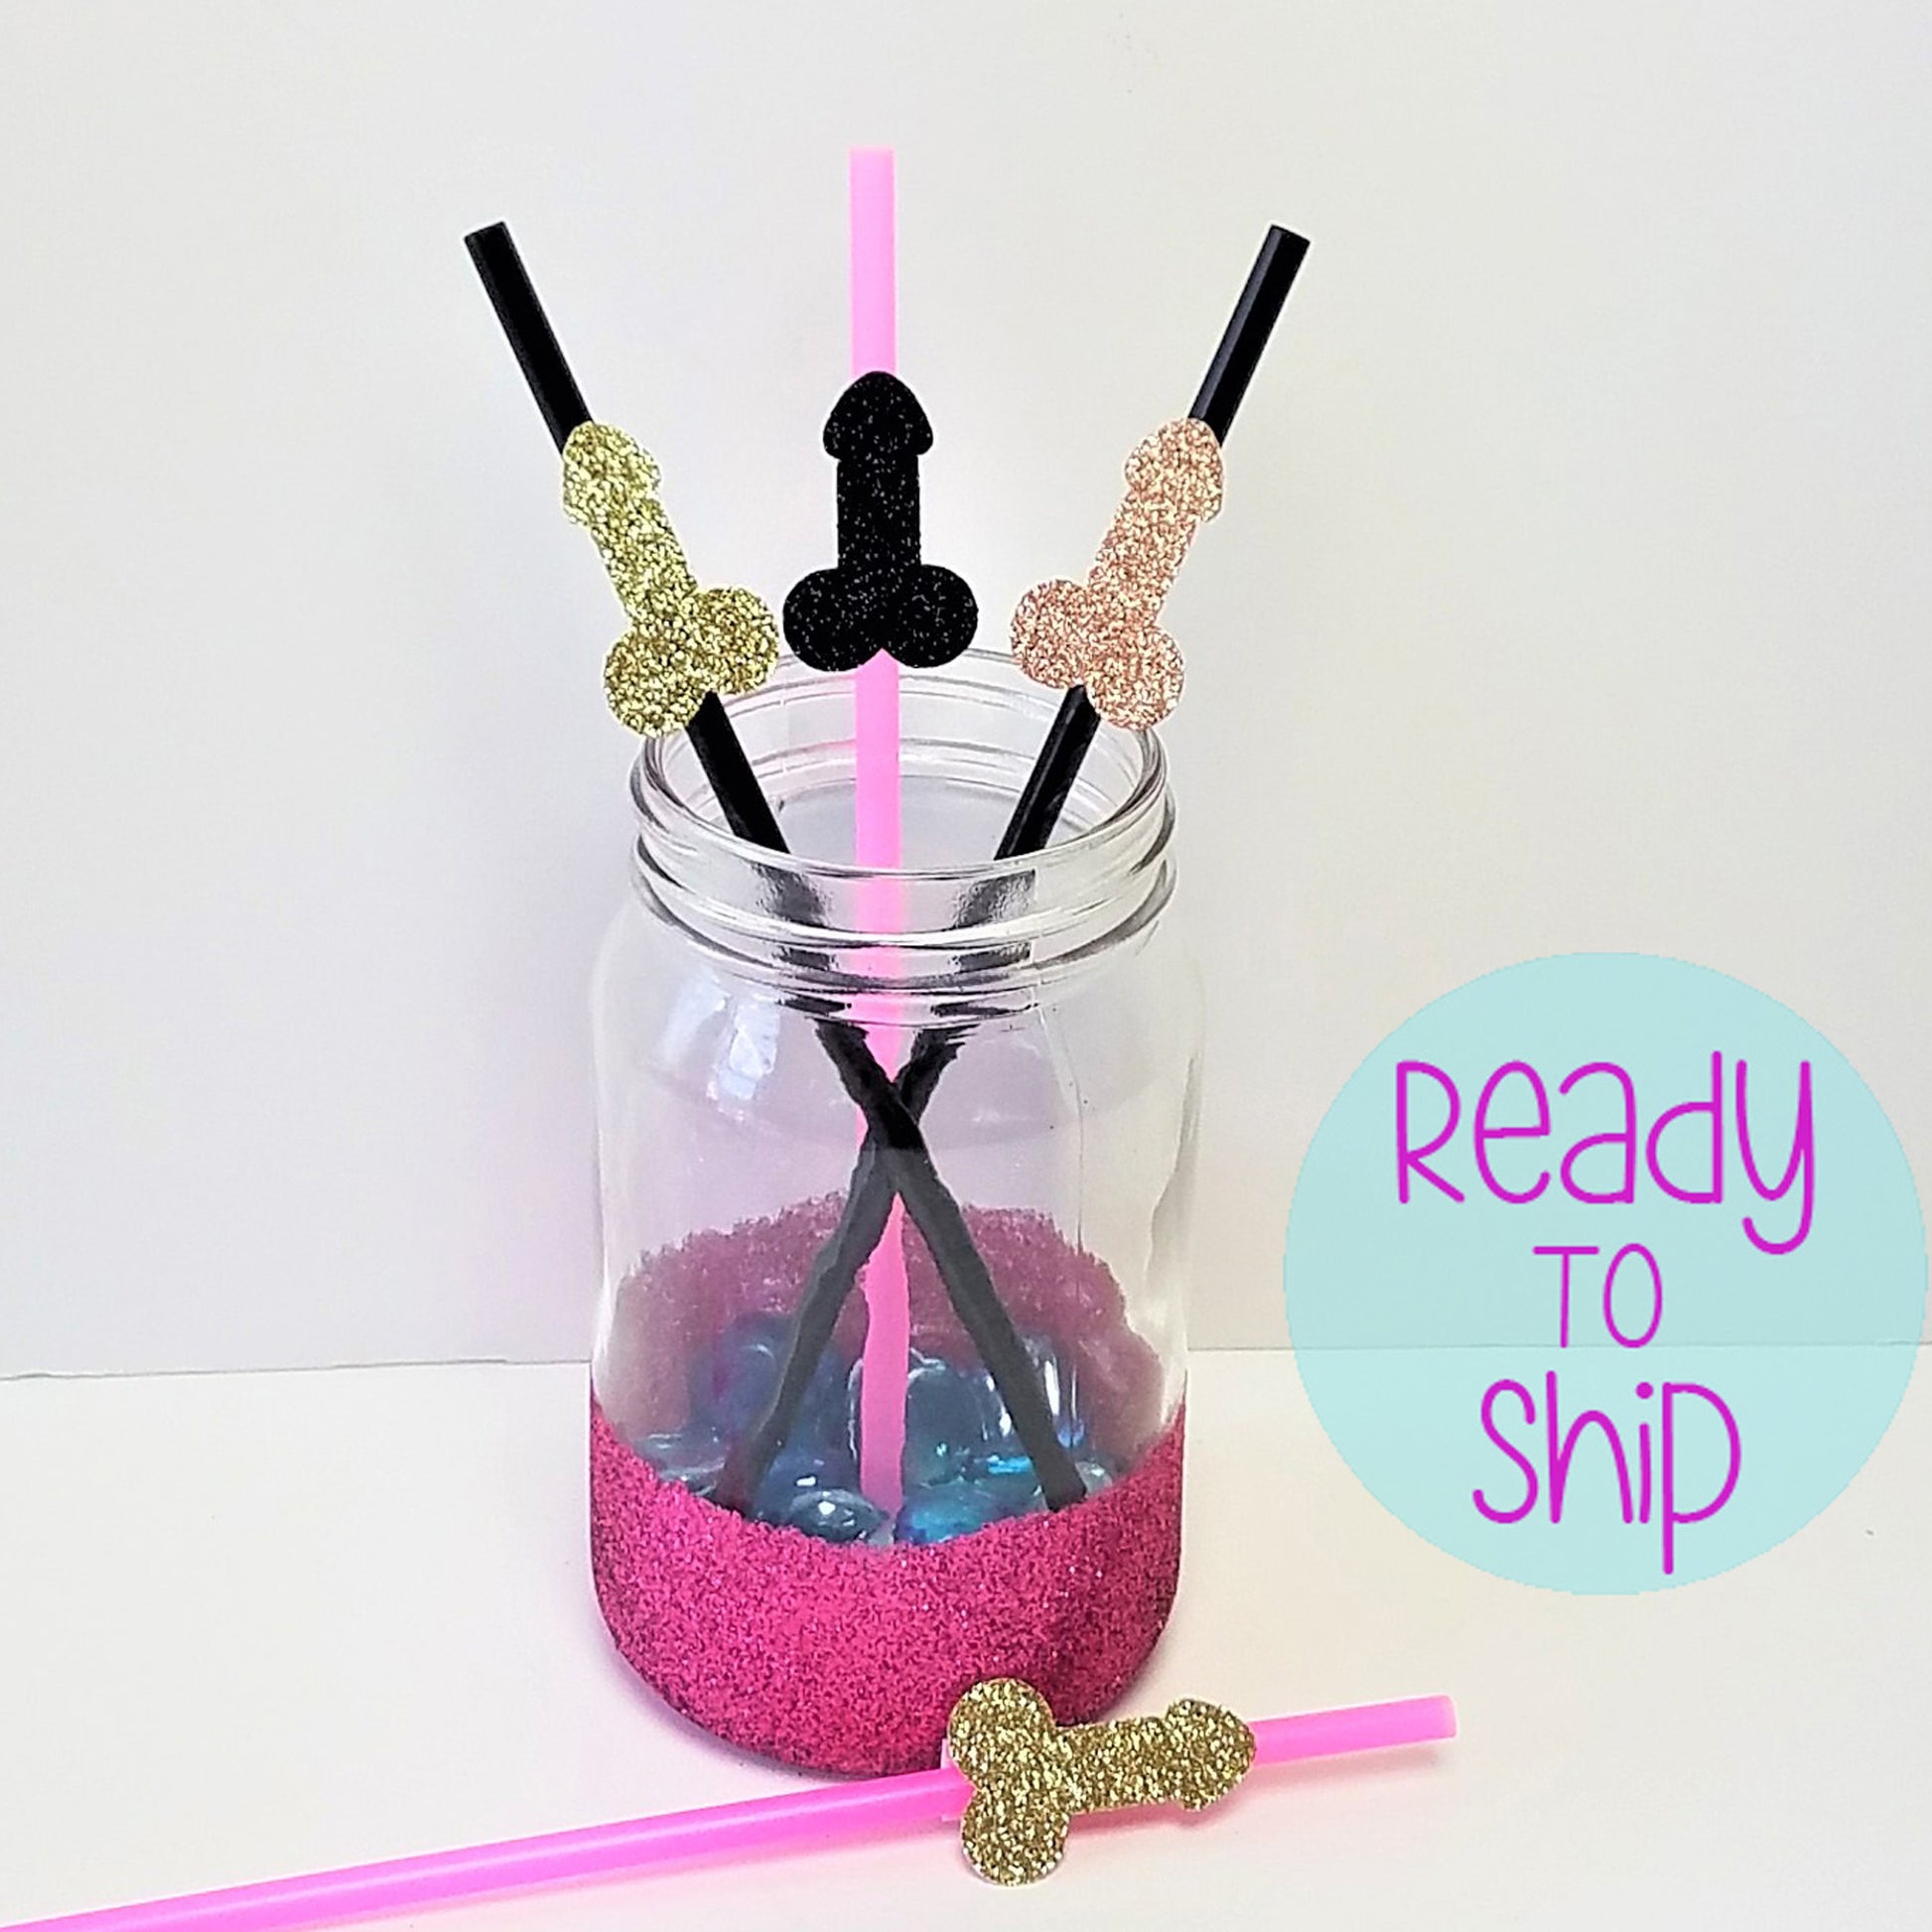 Funny straws and skewers in the form of penis and vagina